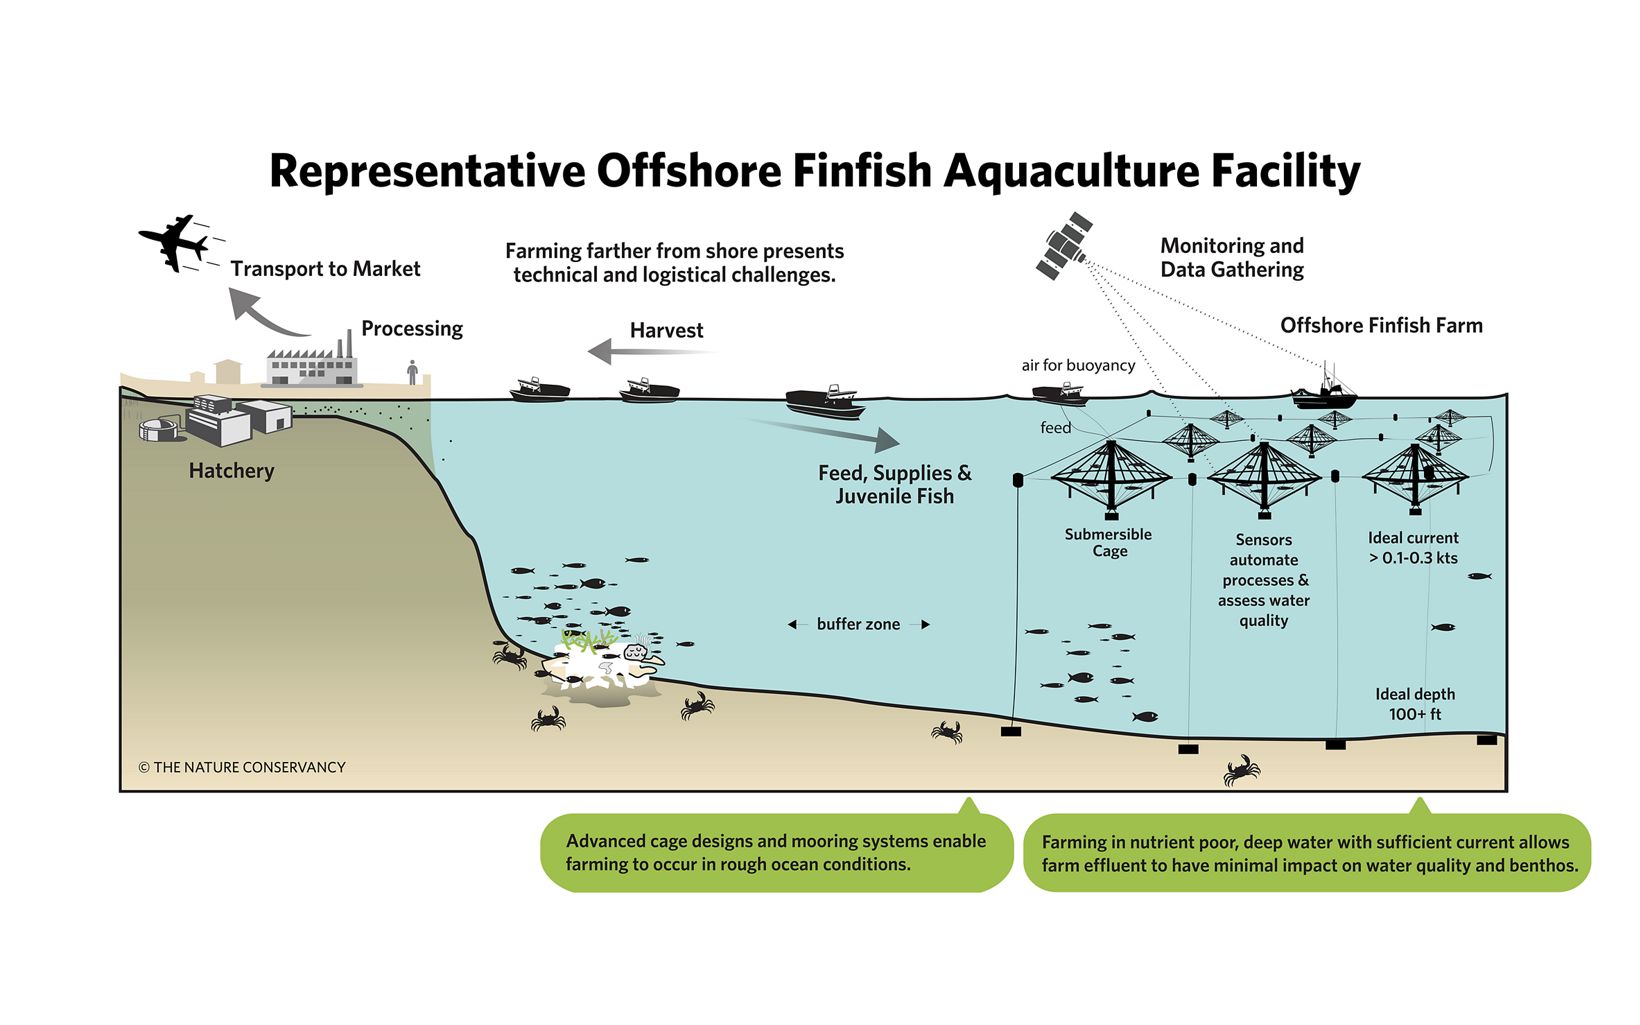 Offshore finfish farming has the potential to provide another sustainable and scalable alternative to near-shore aquaculture and is likely to constitute an important subset of overall sector growth.